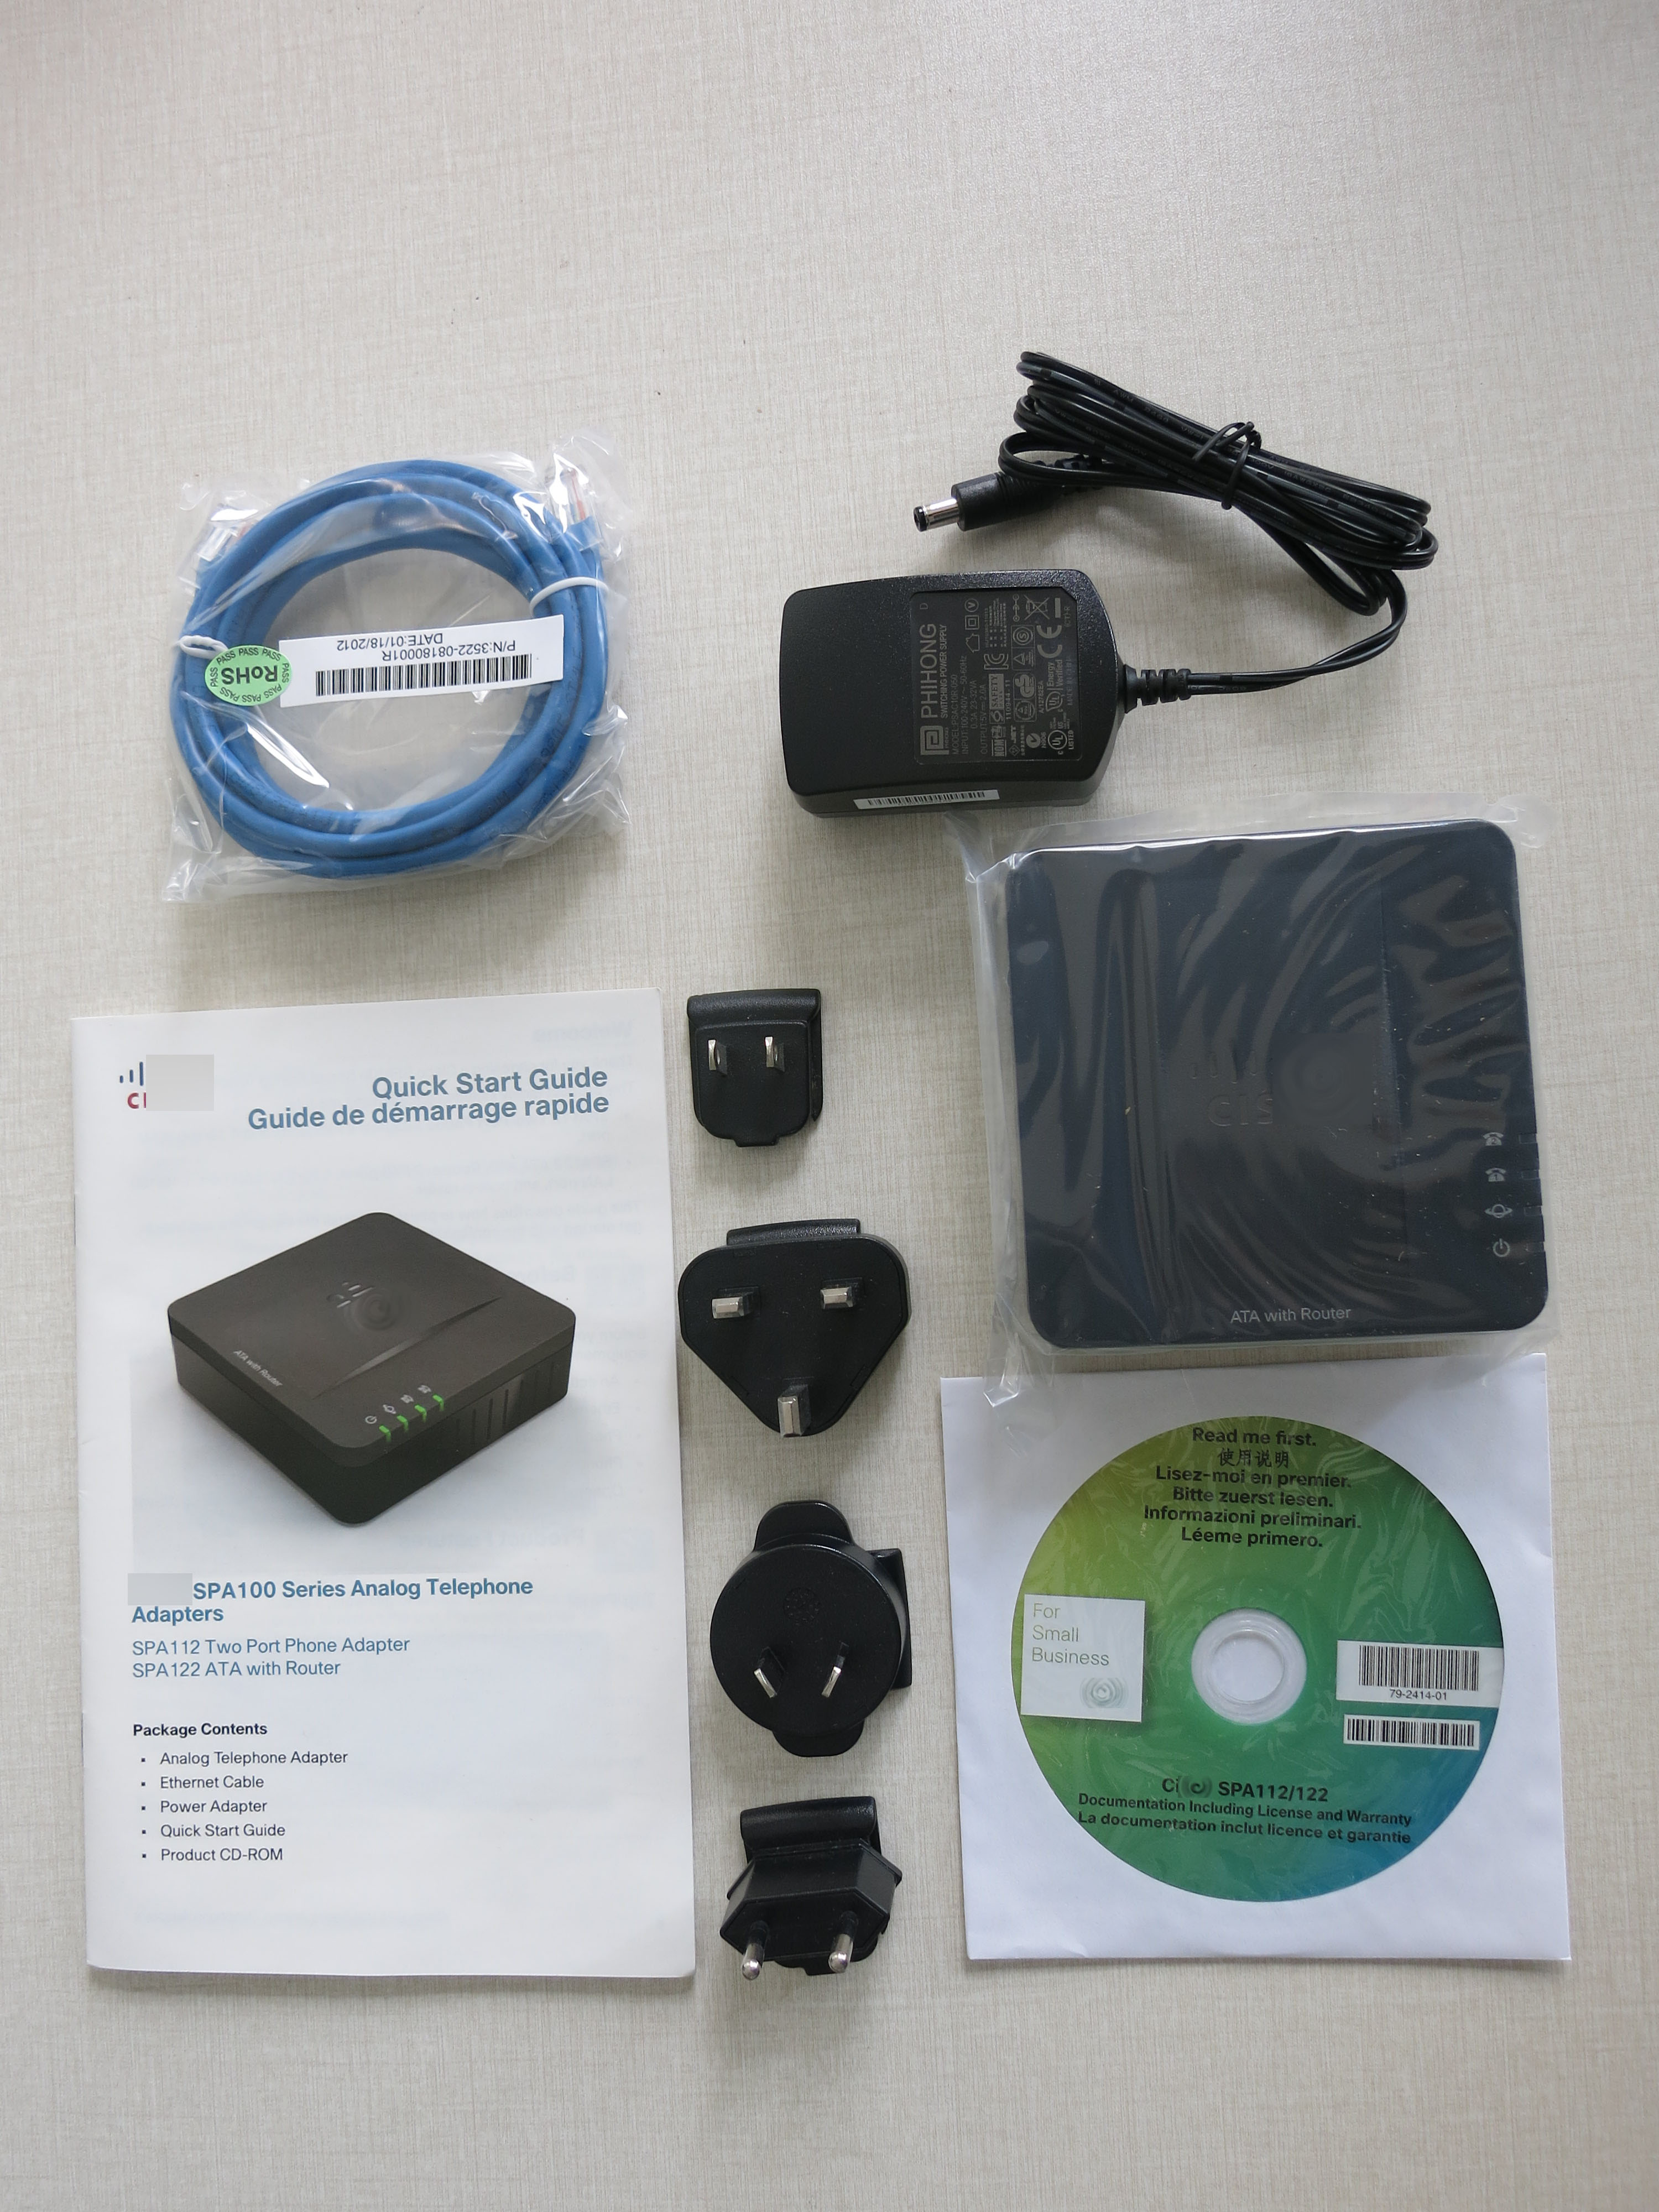 Original Voice gateway SPA122 ATA with Router VoIP phone adapter